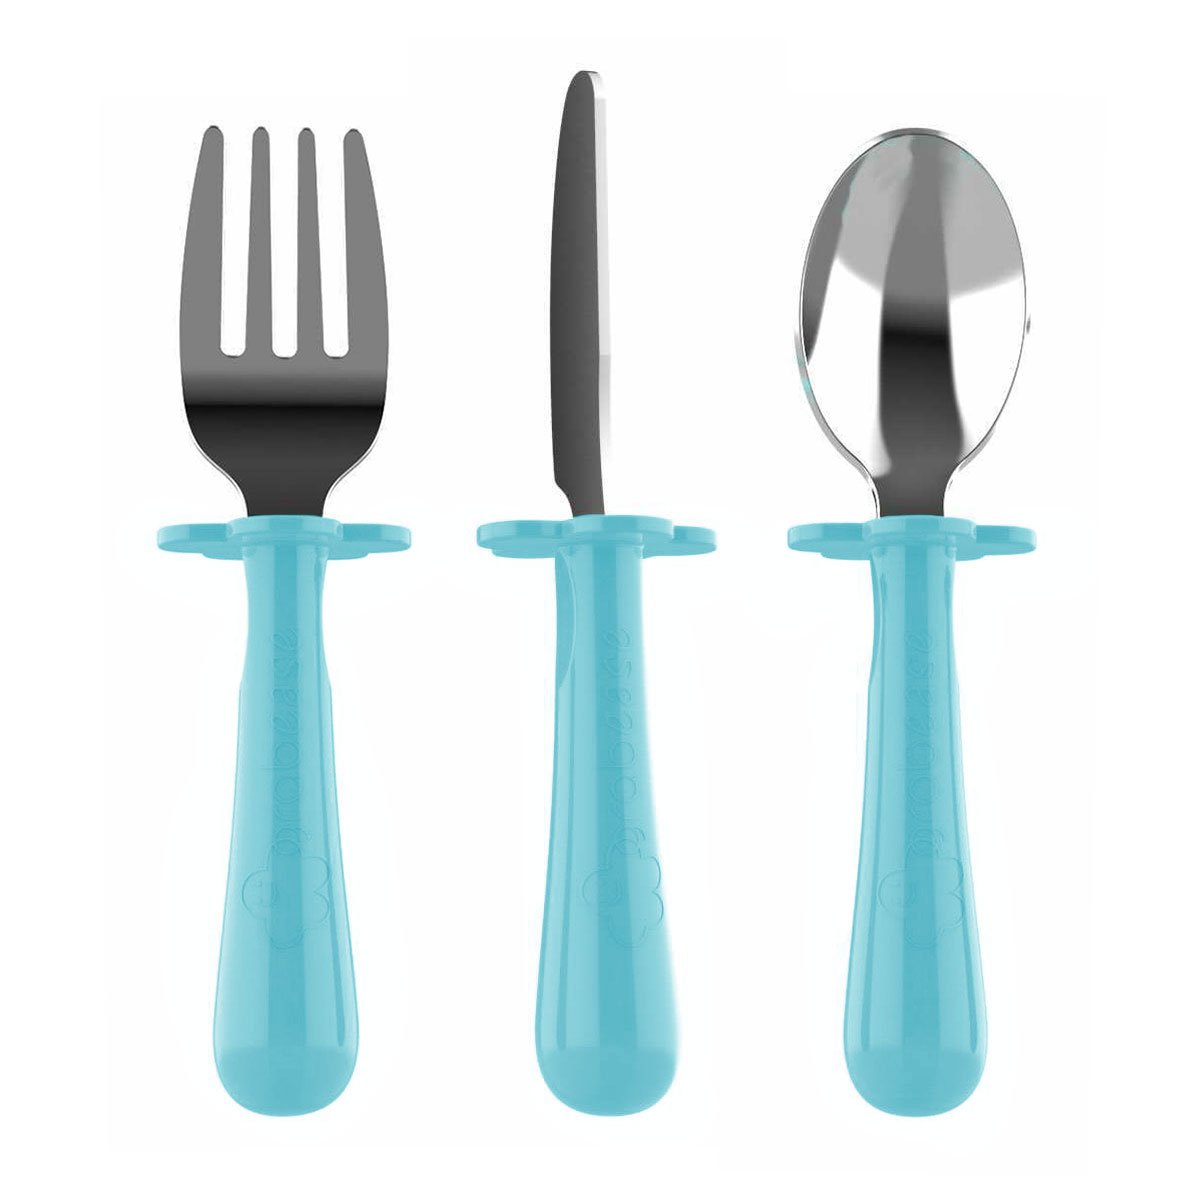 KA-BAR Lunch Pal Utensil Set - Spoon/Fork/Knife, Includes Frost Colored  Carrying Case, Teal